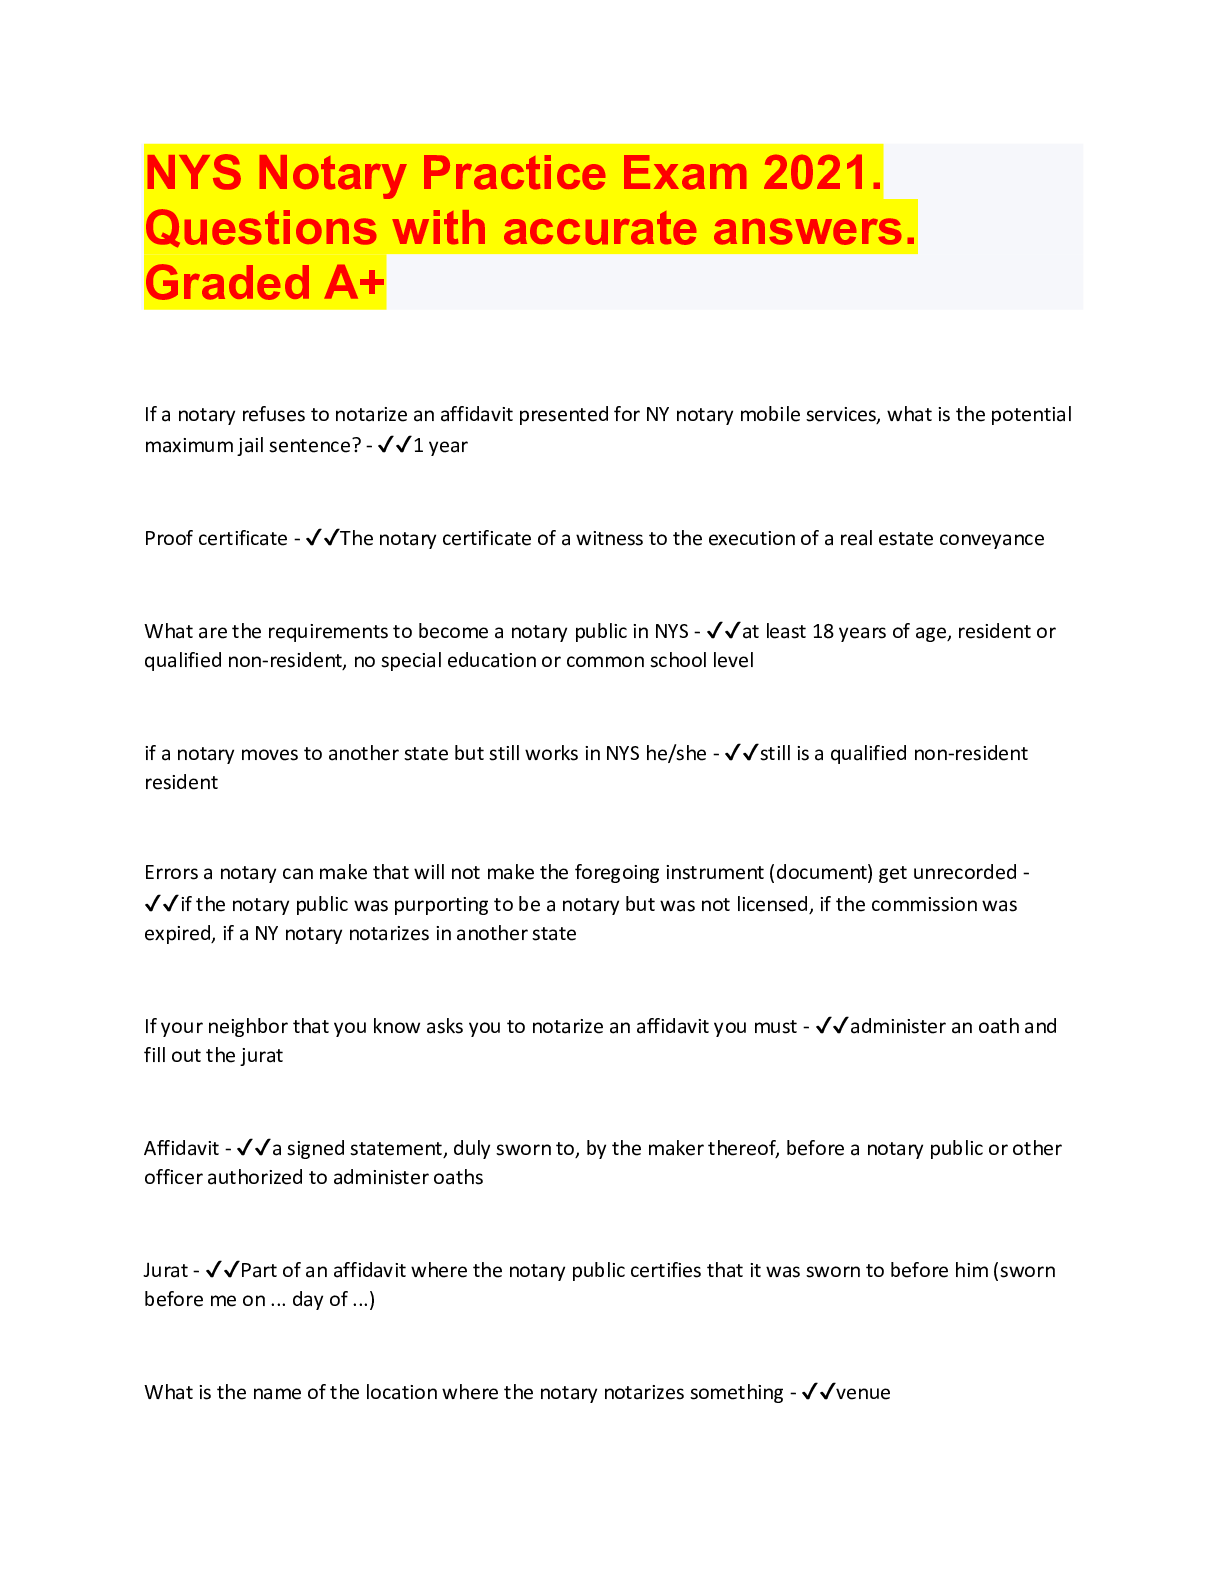 NYS Notary Exam Study guide. Questions with accurate answers , rated A+